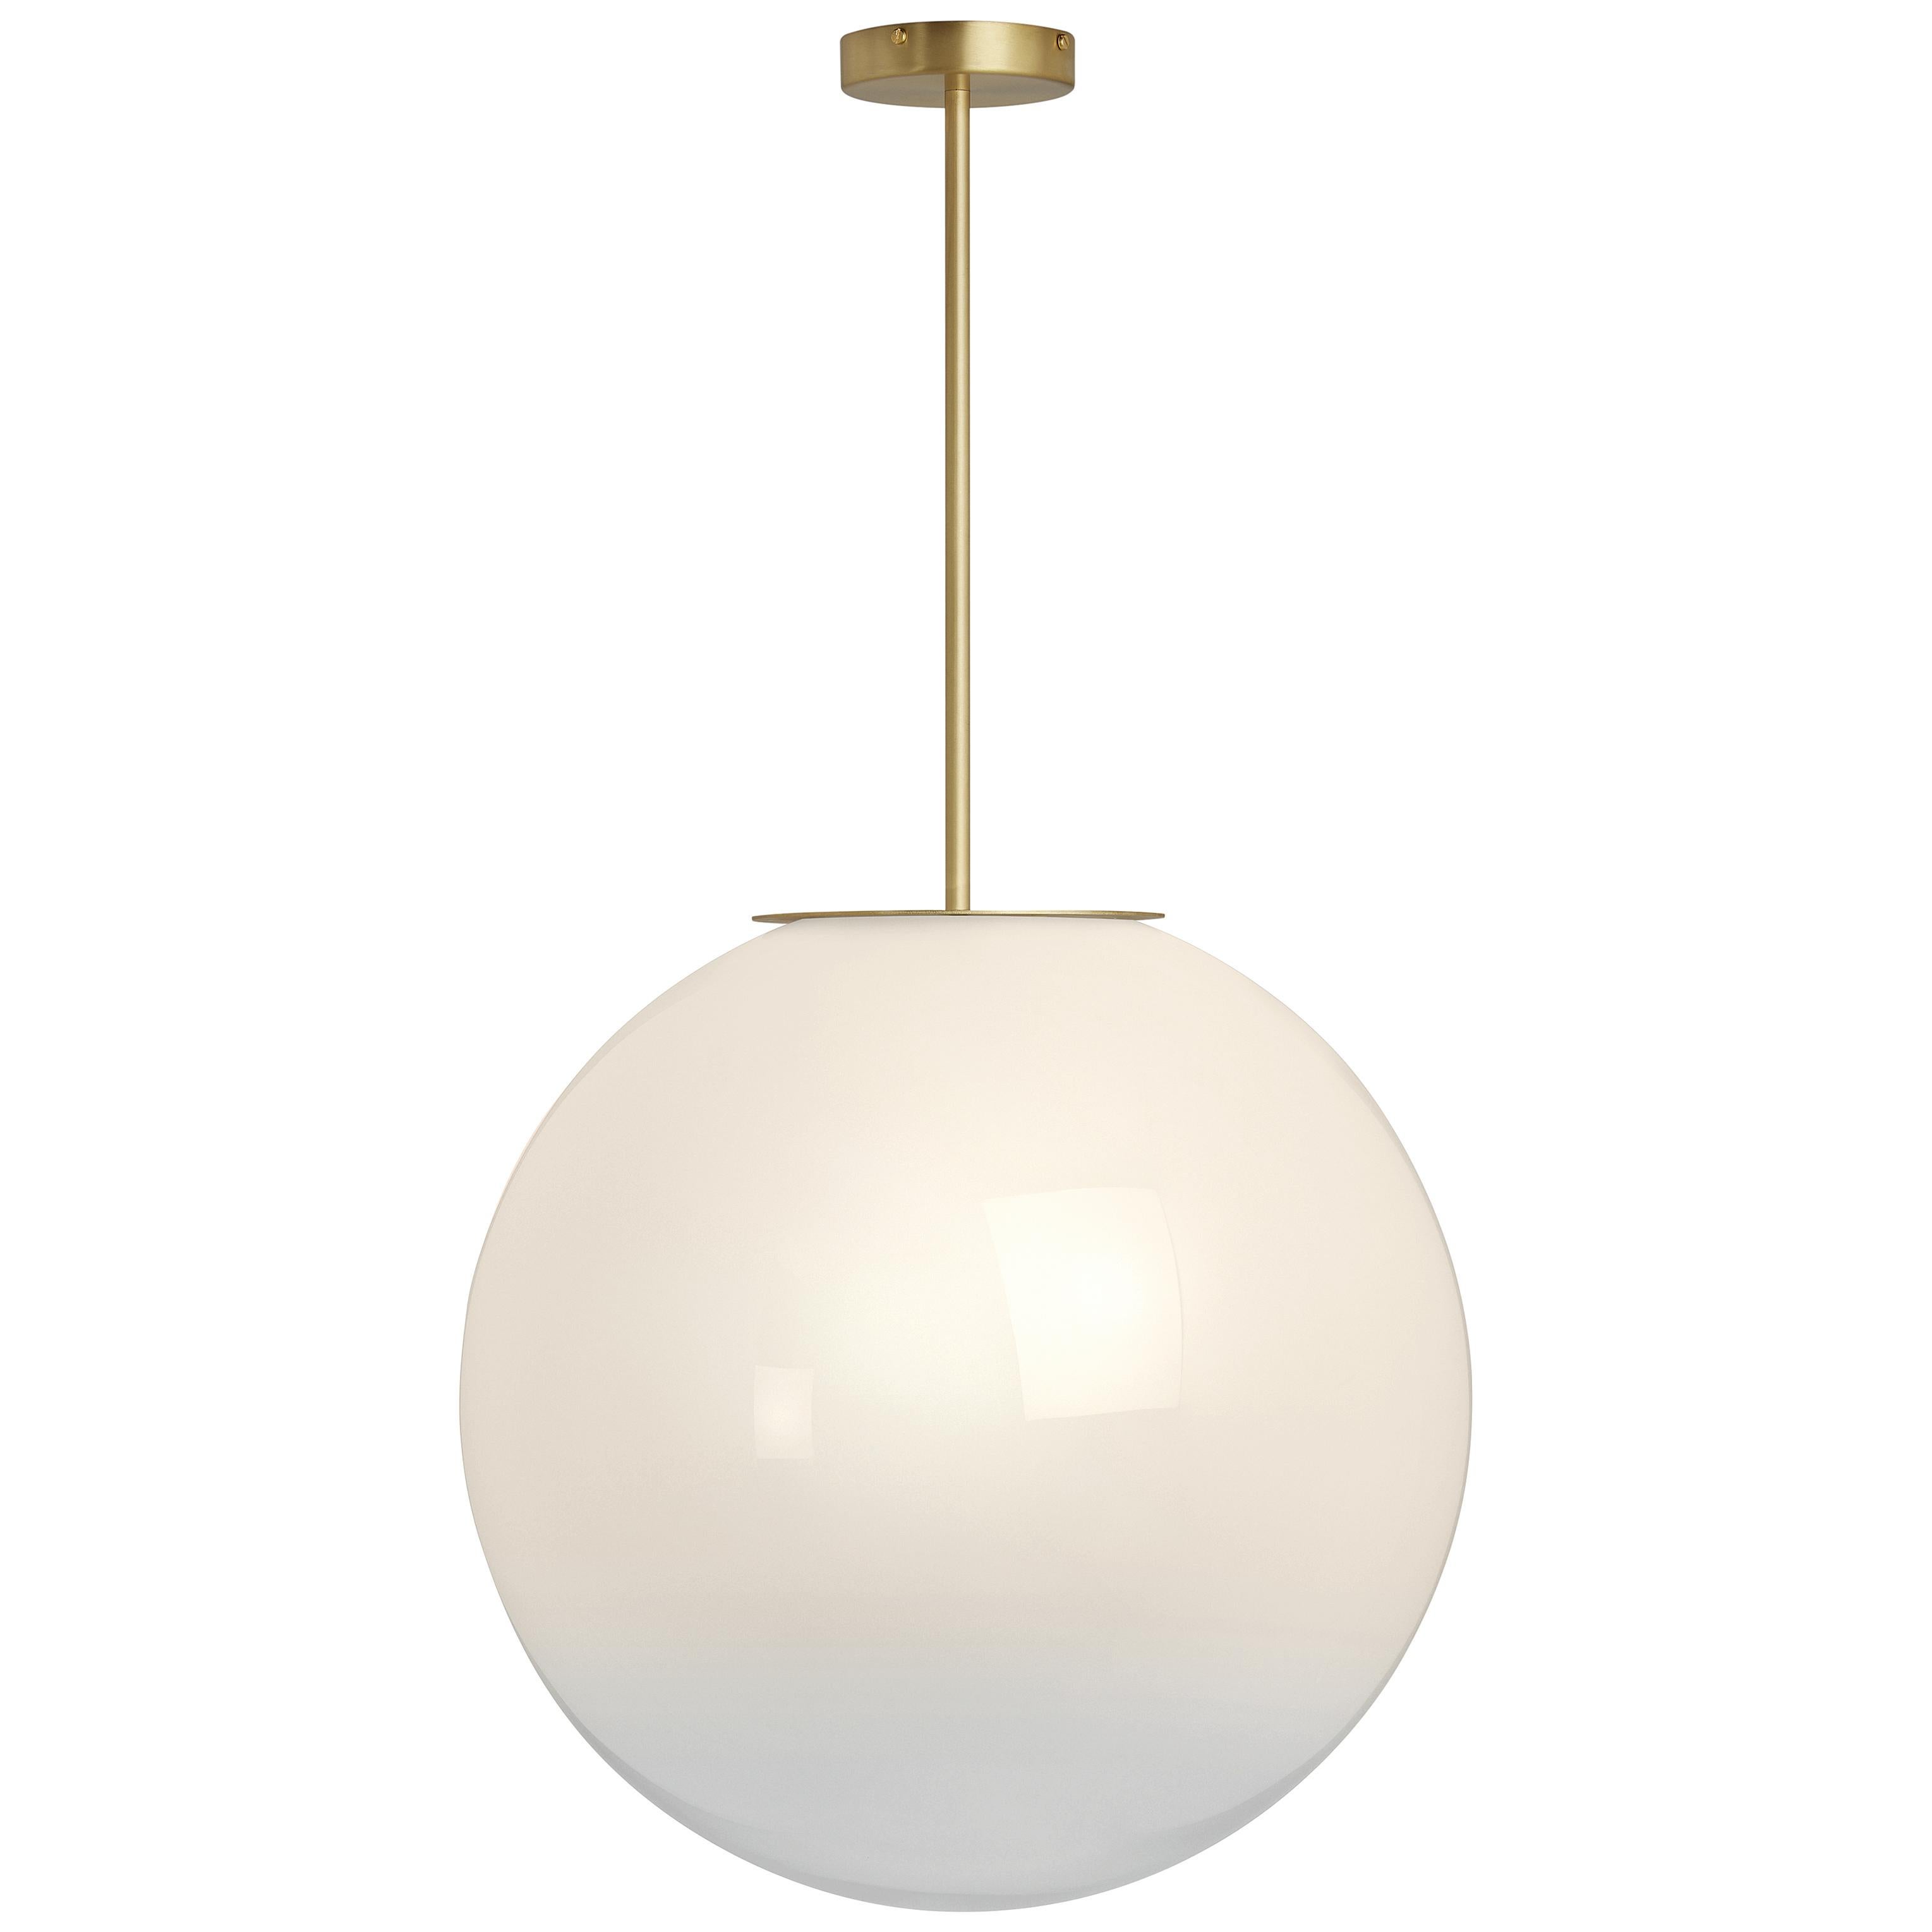 Skye large pendant by CTO Lighting
Materials: Satin brass with sfumato glass shade
Also available in dark bronze with sfumato glass shade
Dimensions: H 49 x W 50 cm 

All our lamps can be wired according to each country. If sold to the USA it will